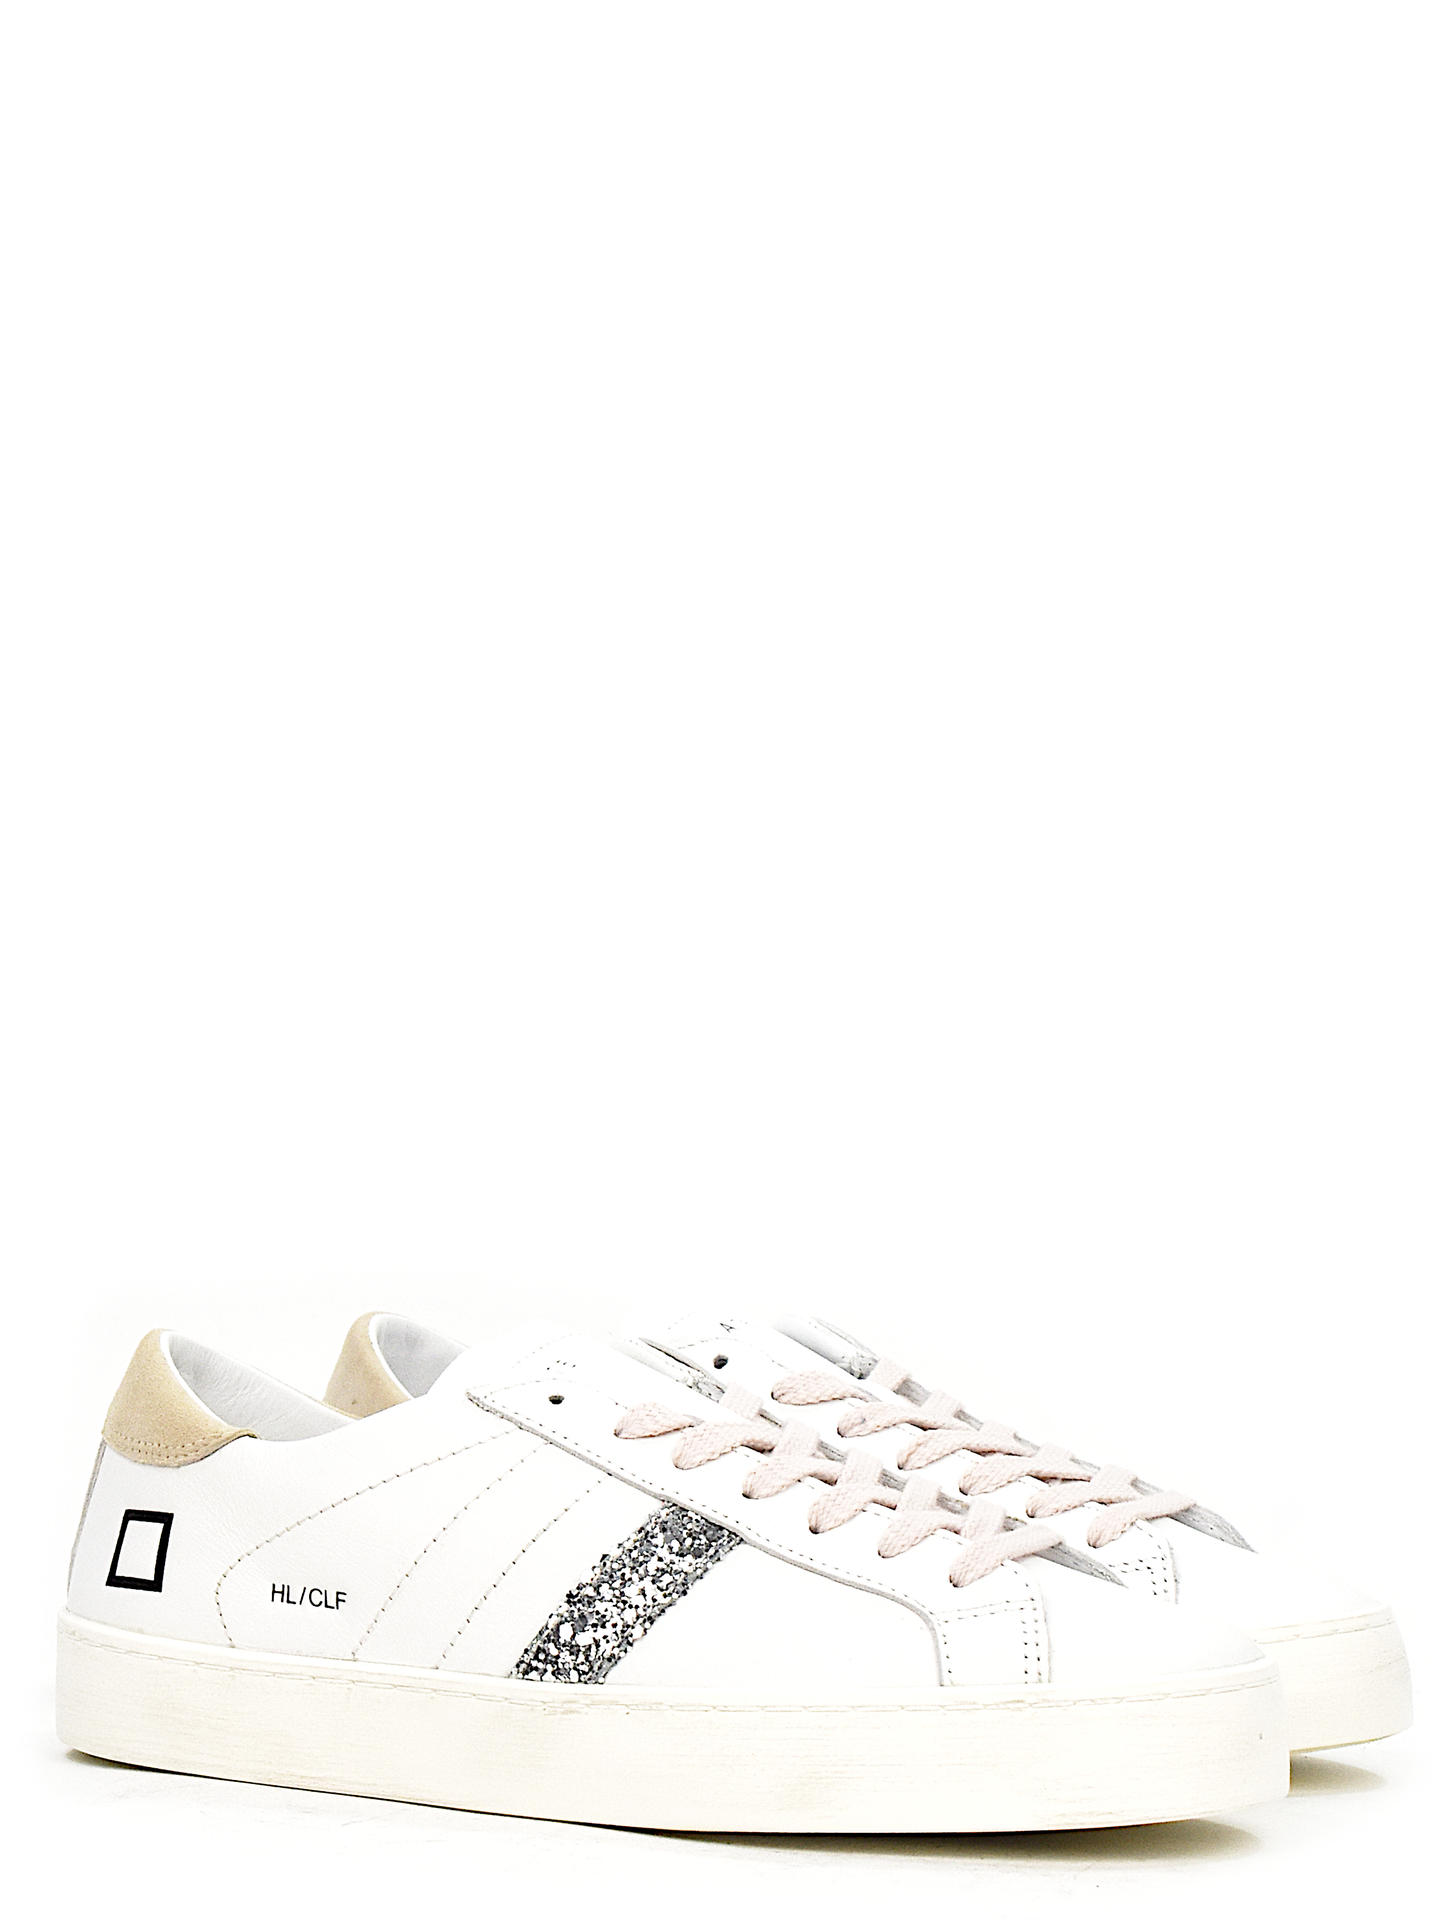 SNEAKERS D.A.T.E HLCAHBH BIANCO/BEIGE